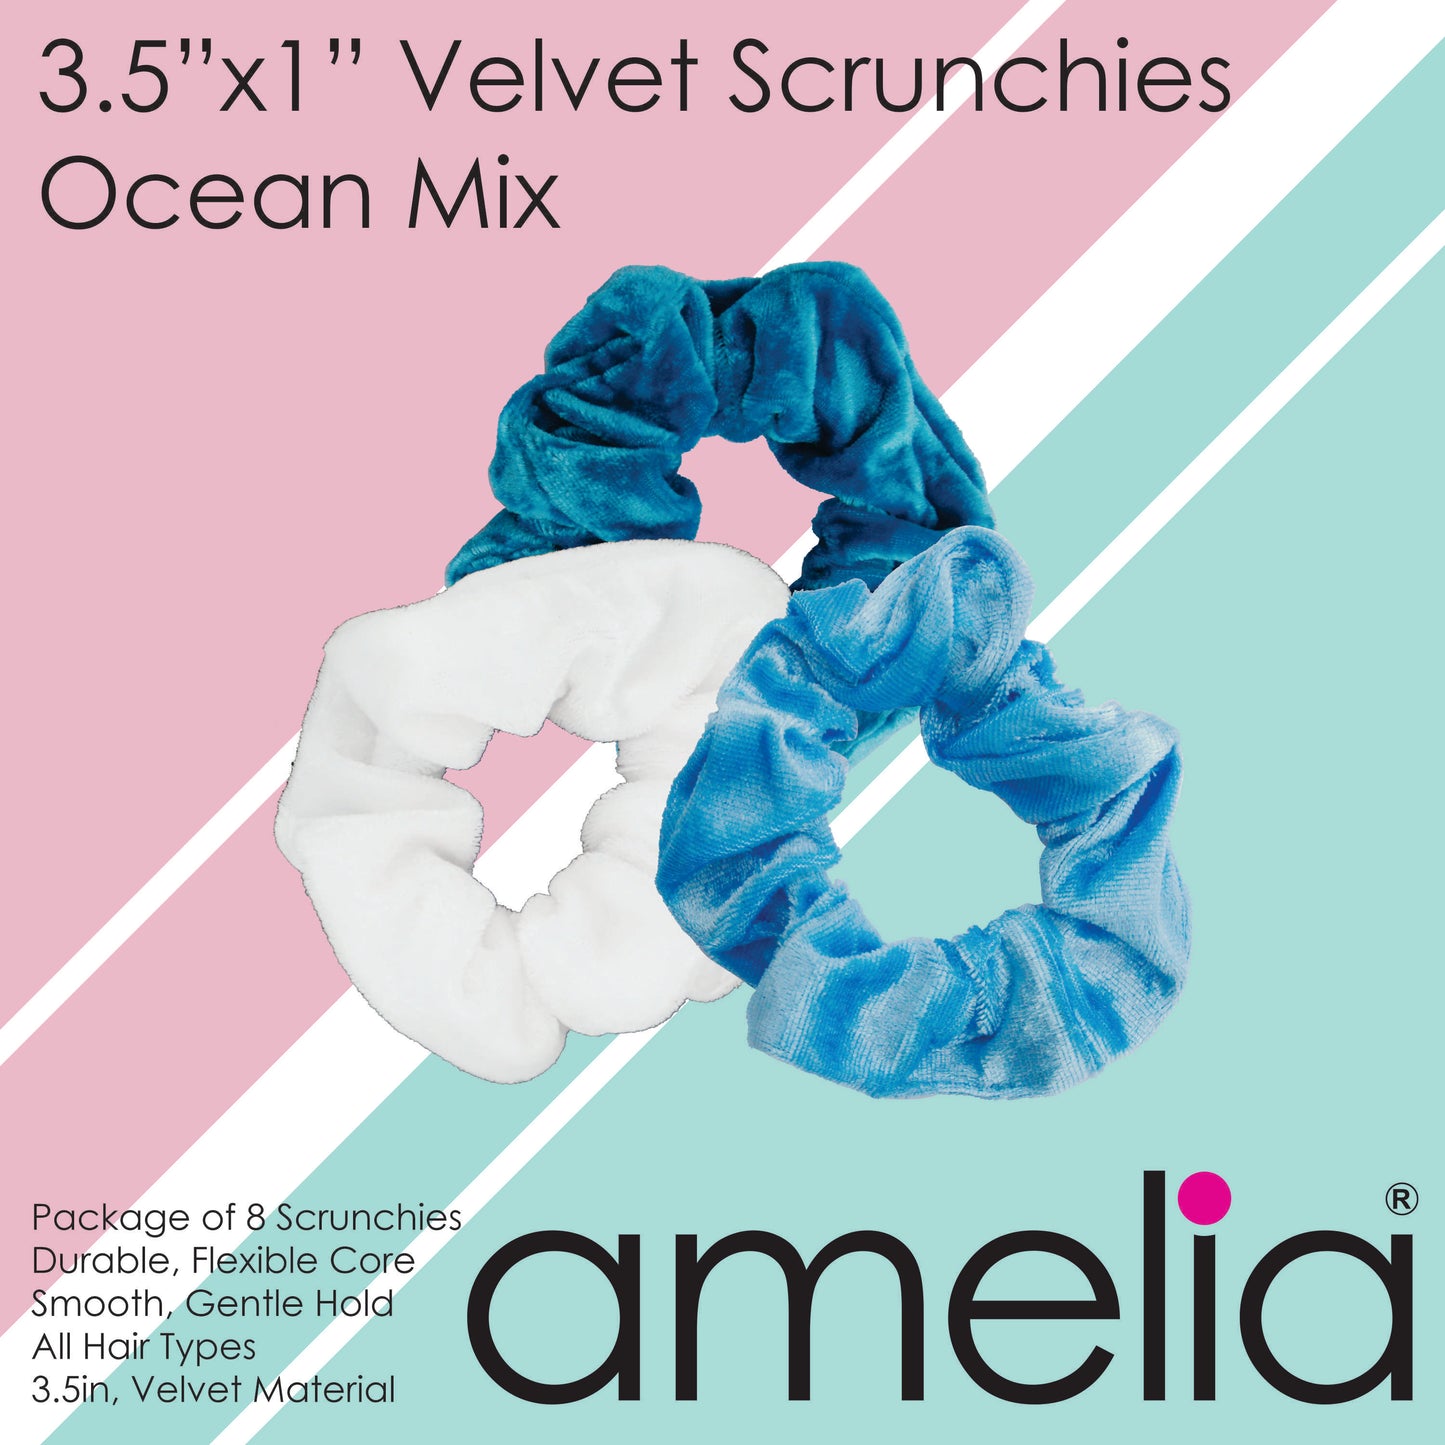 Amelia Beauty, Ocean Blend Velvet Scrunchies, 3.5in Diameter, Gentle on Hair, Strong Hold, No Snag, No Dents or Creases. 8 Pack